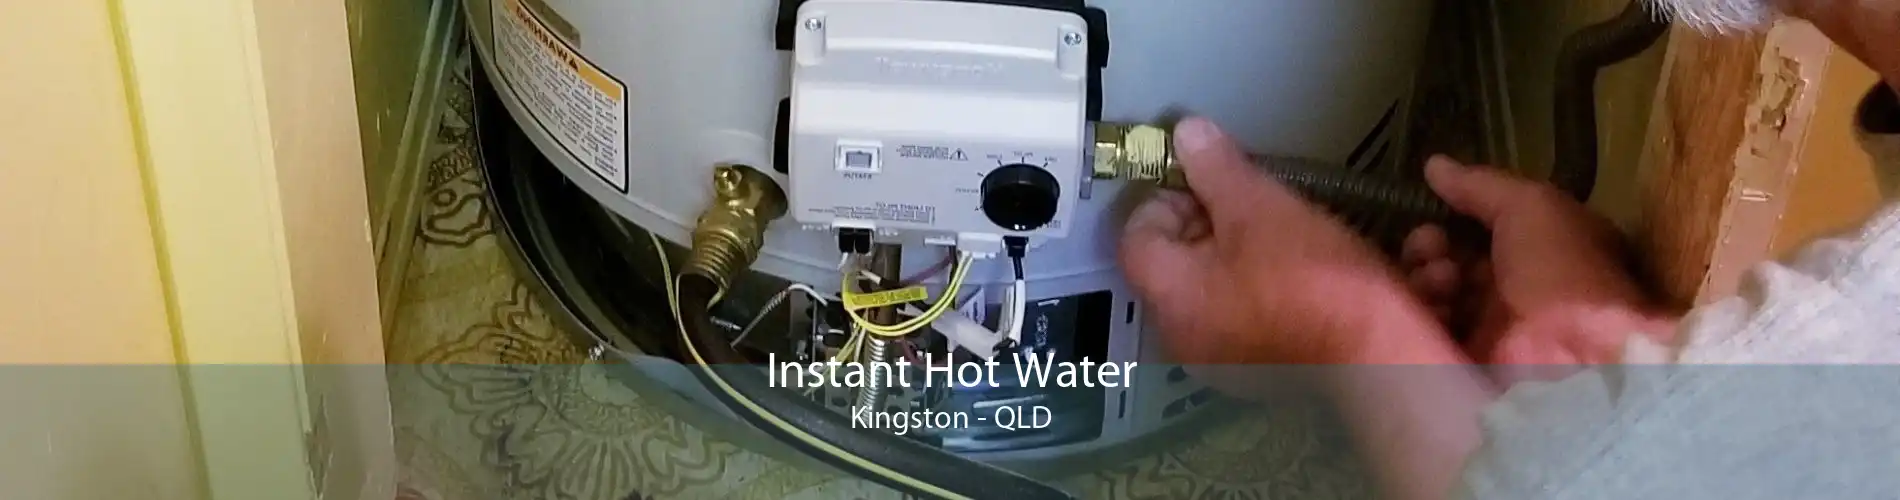 Instant Hot Water Kingston - QLD